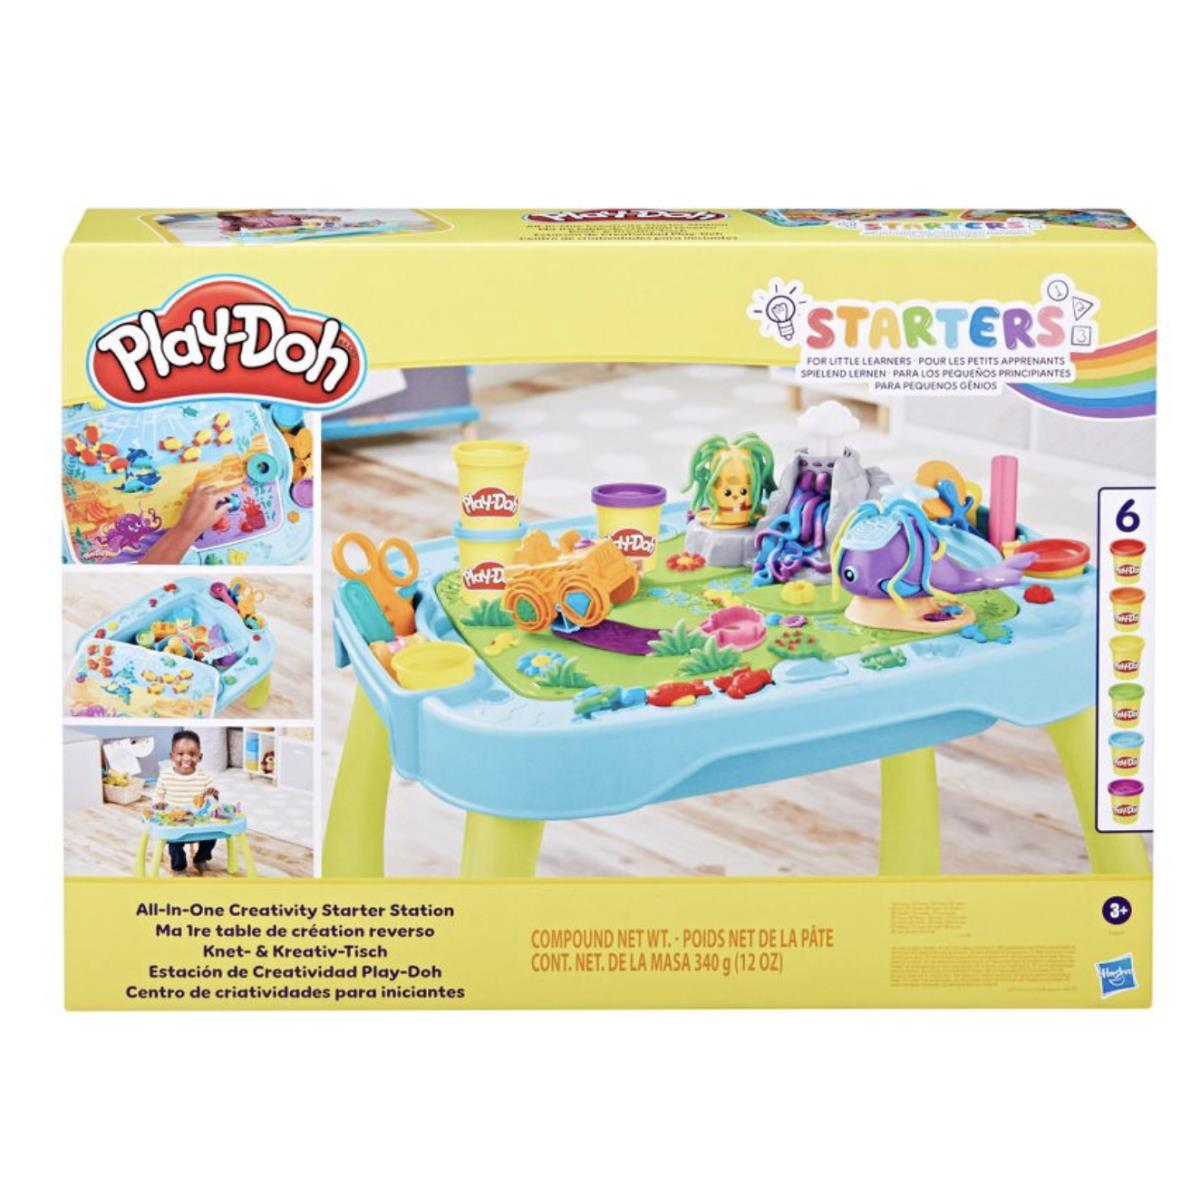 Play-doh All in 1 Creativity Starter Station Toy